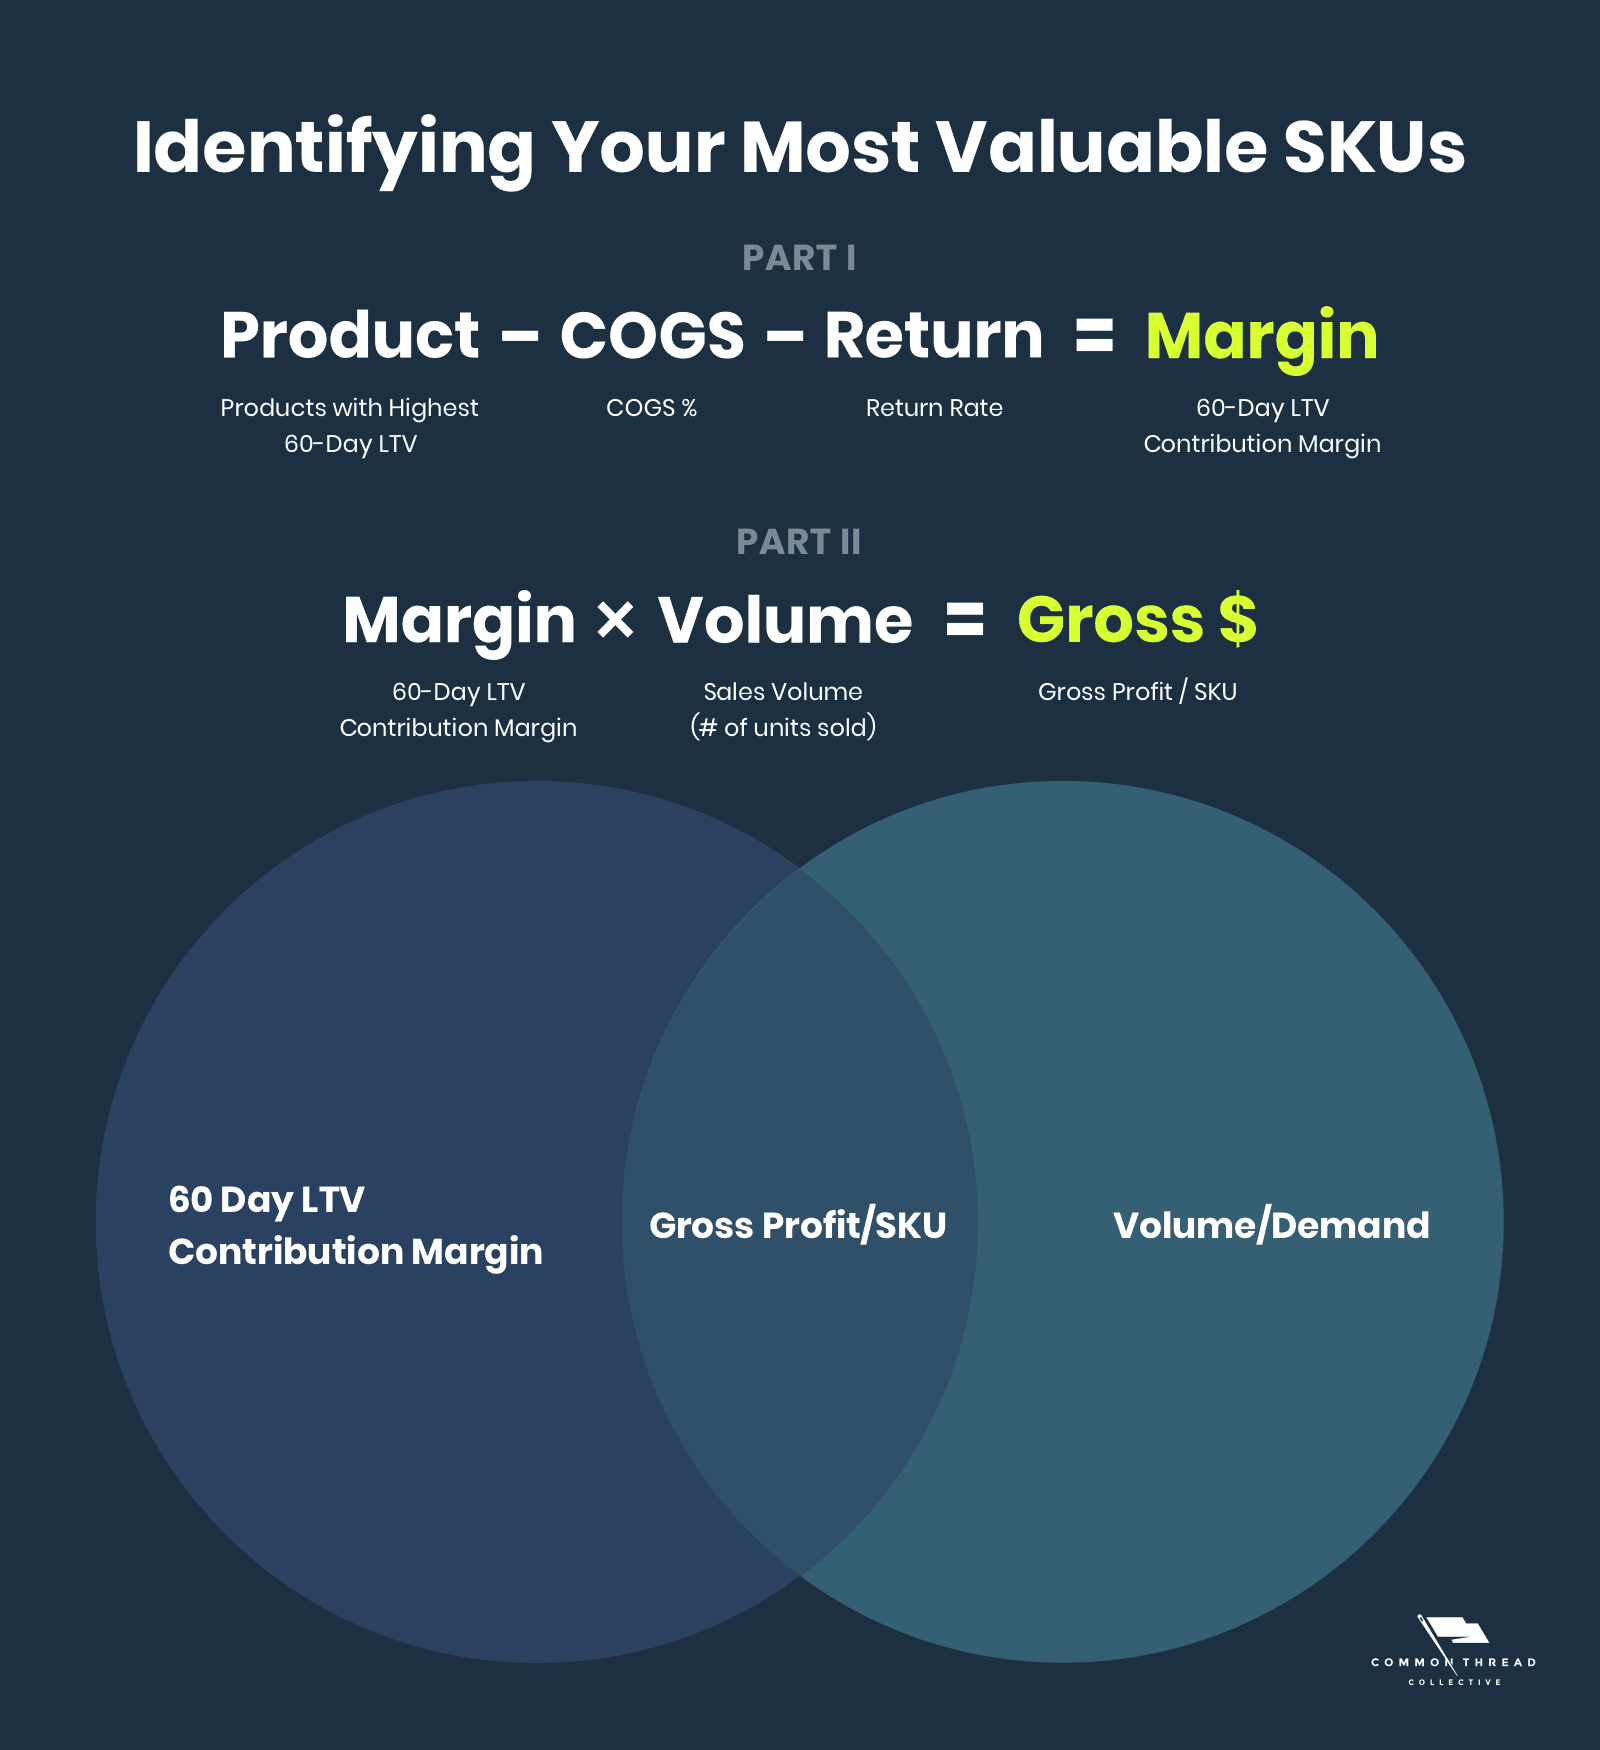 Identifying Your Most-Valuable SKUs for social media advertising